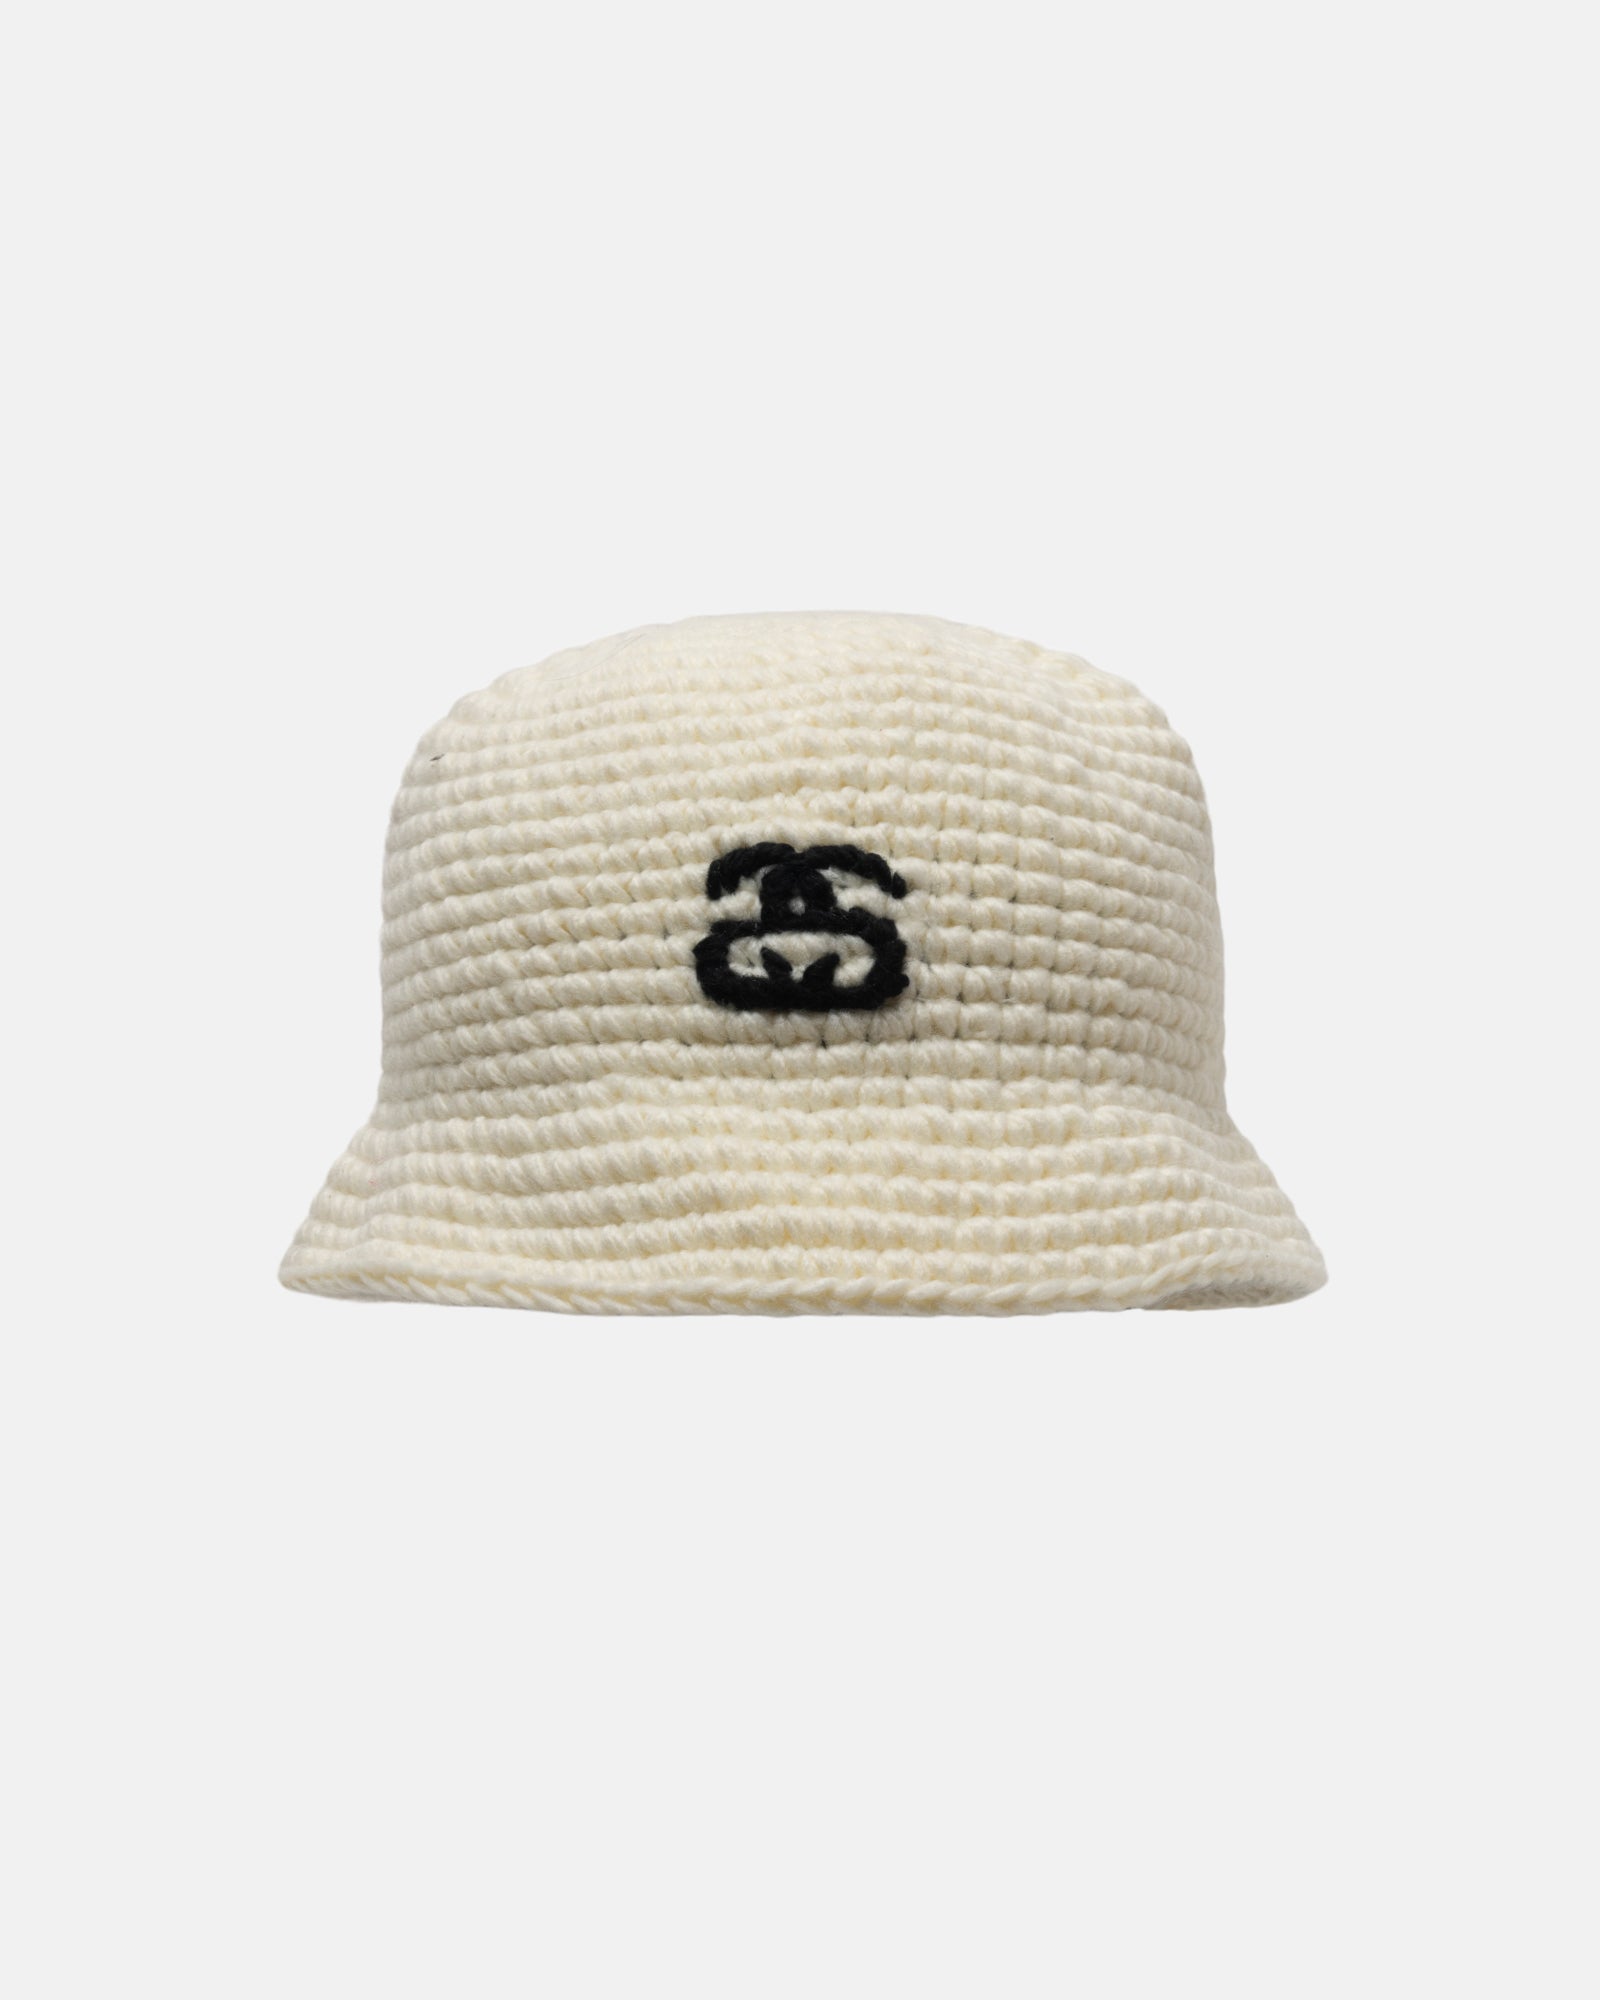 StussySS-LINK KNITBUCKETHAT バケットハット22aw